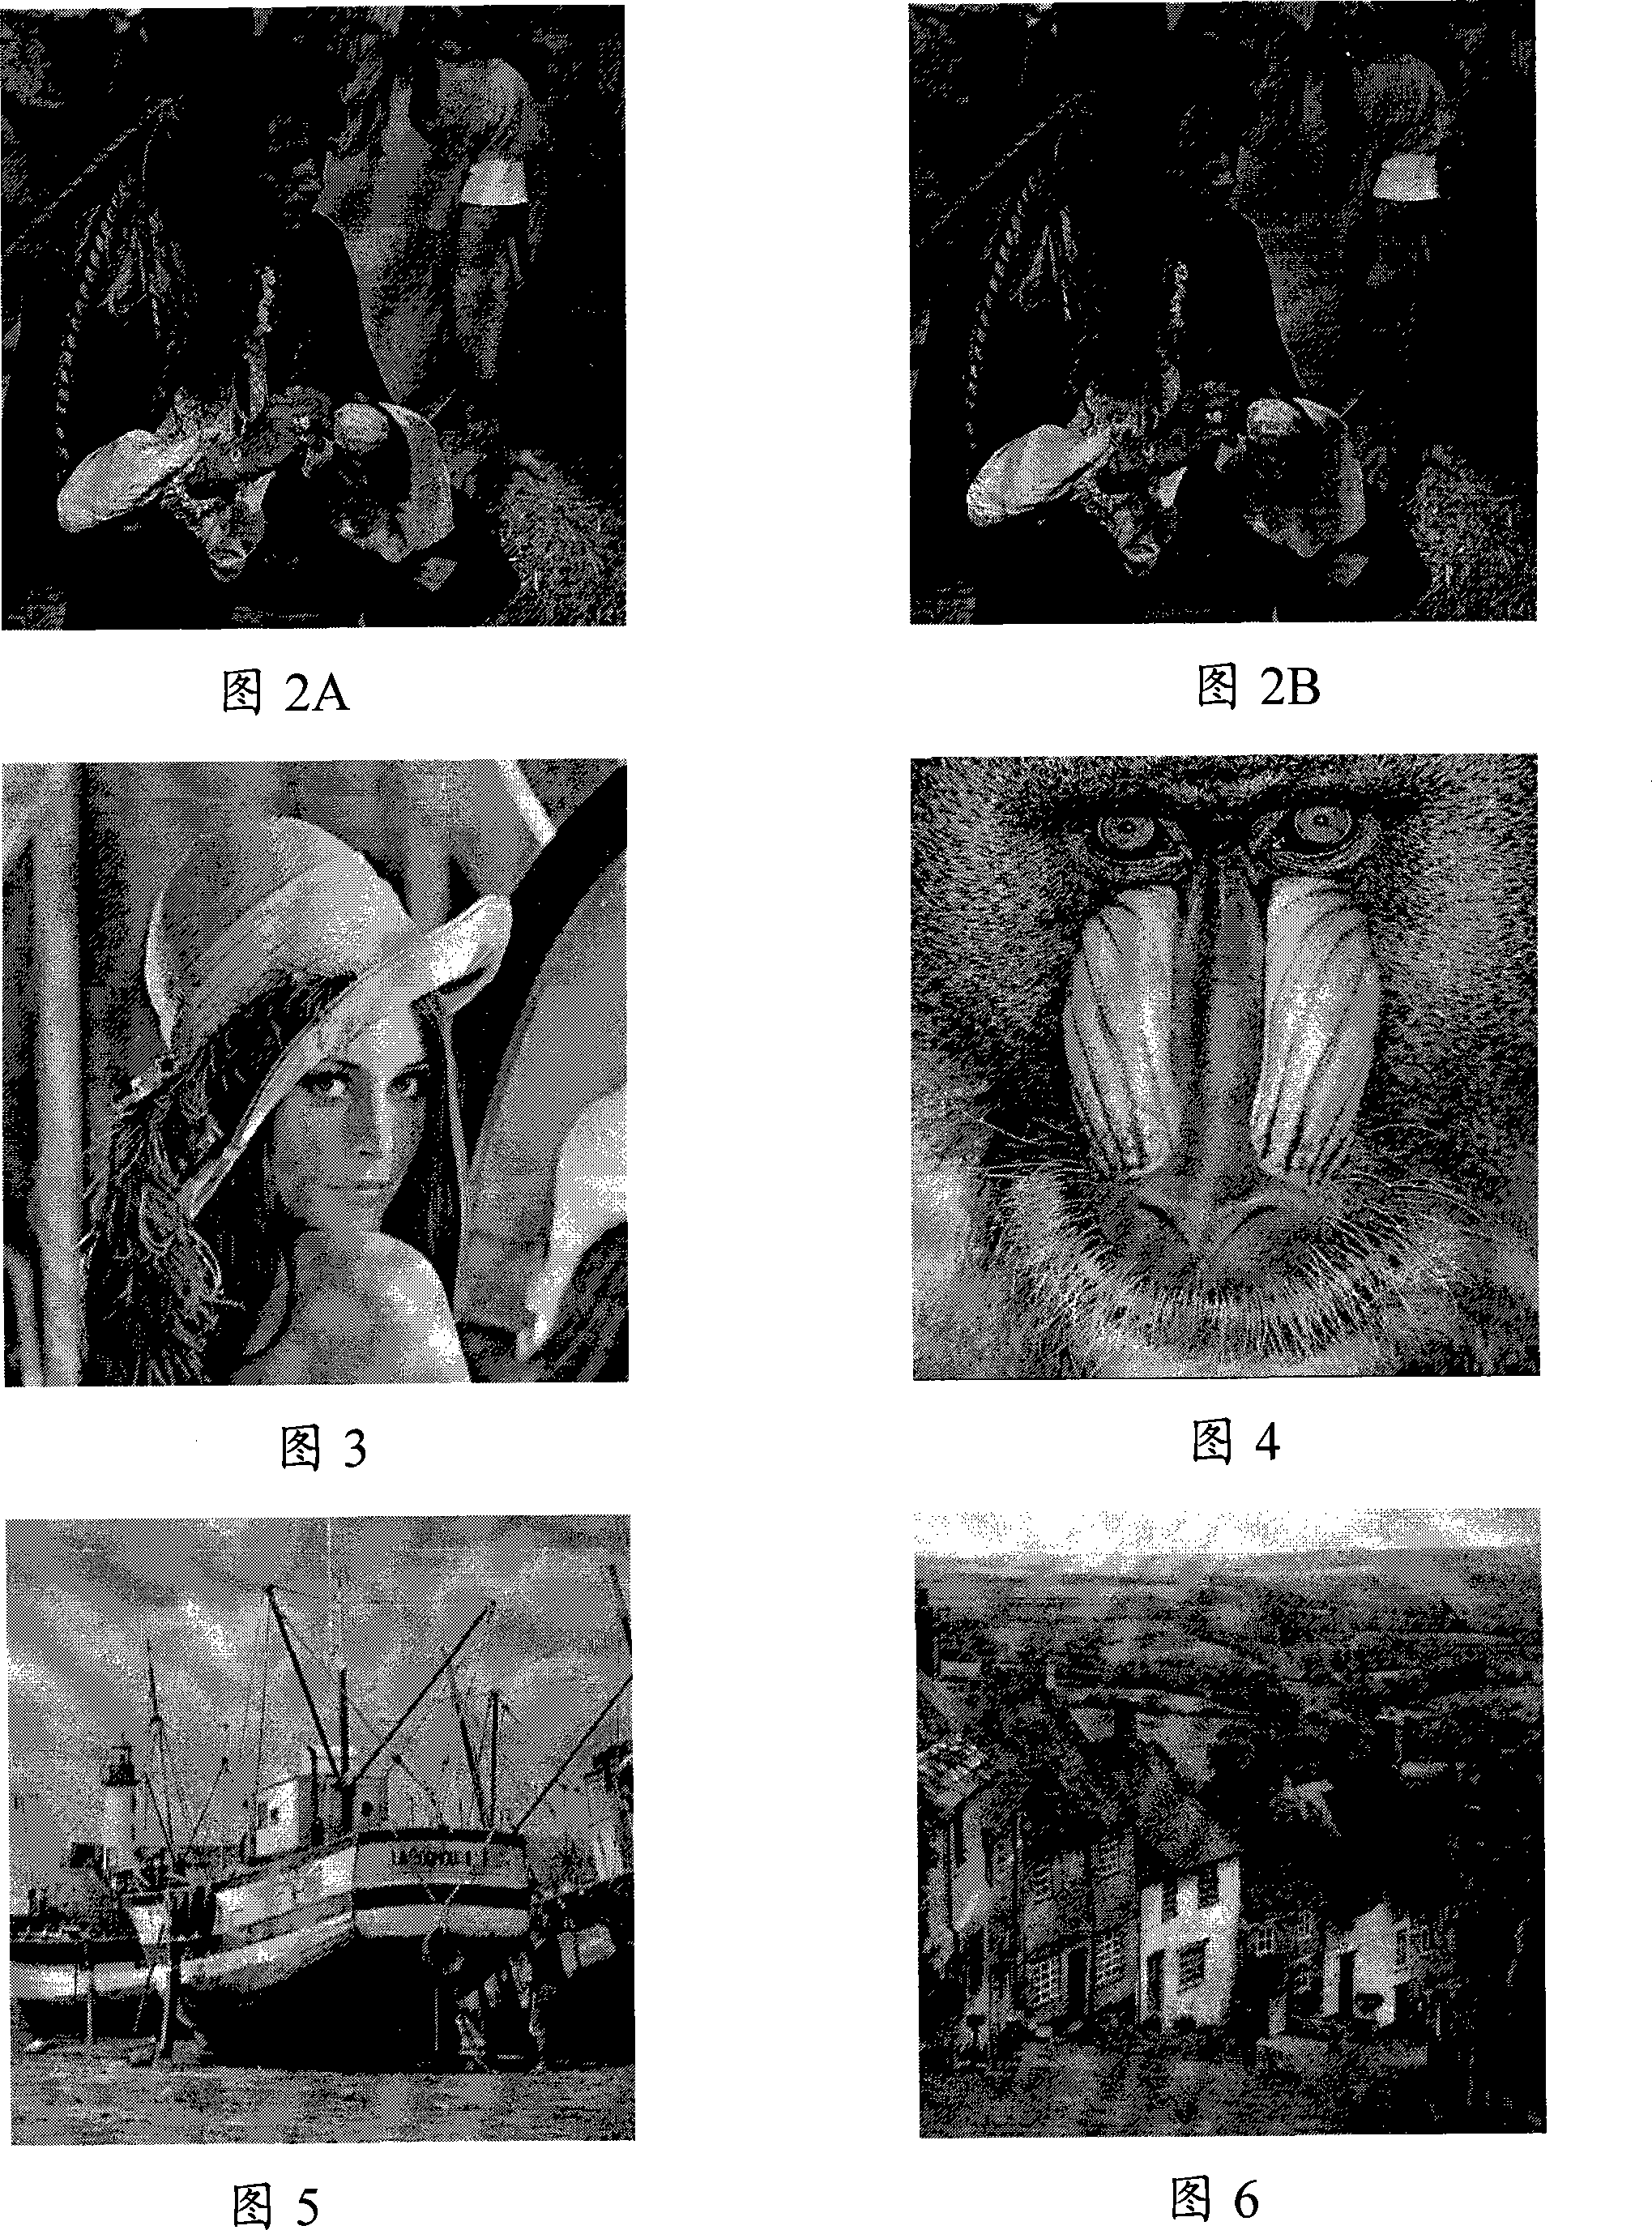 Method and device for imbedding and extracting watermark in digital image